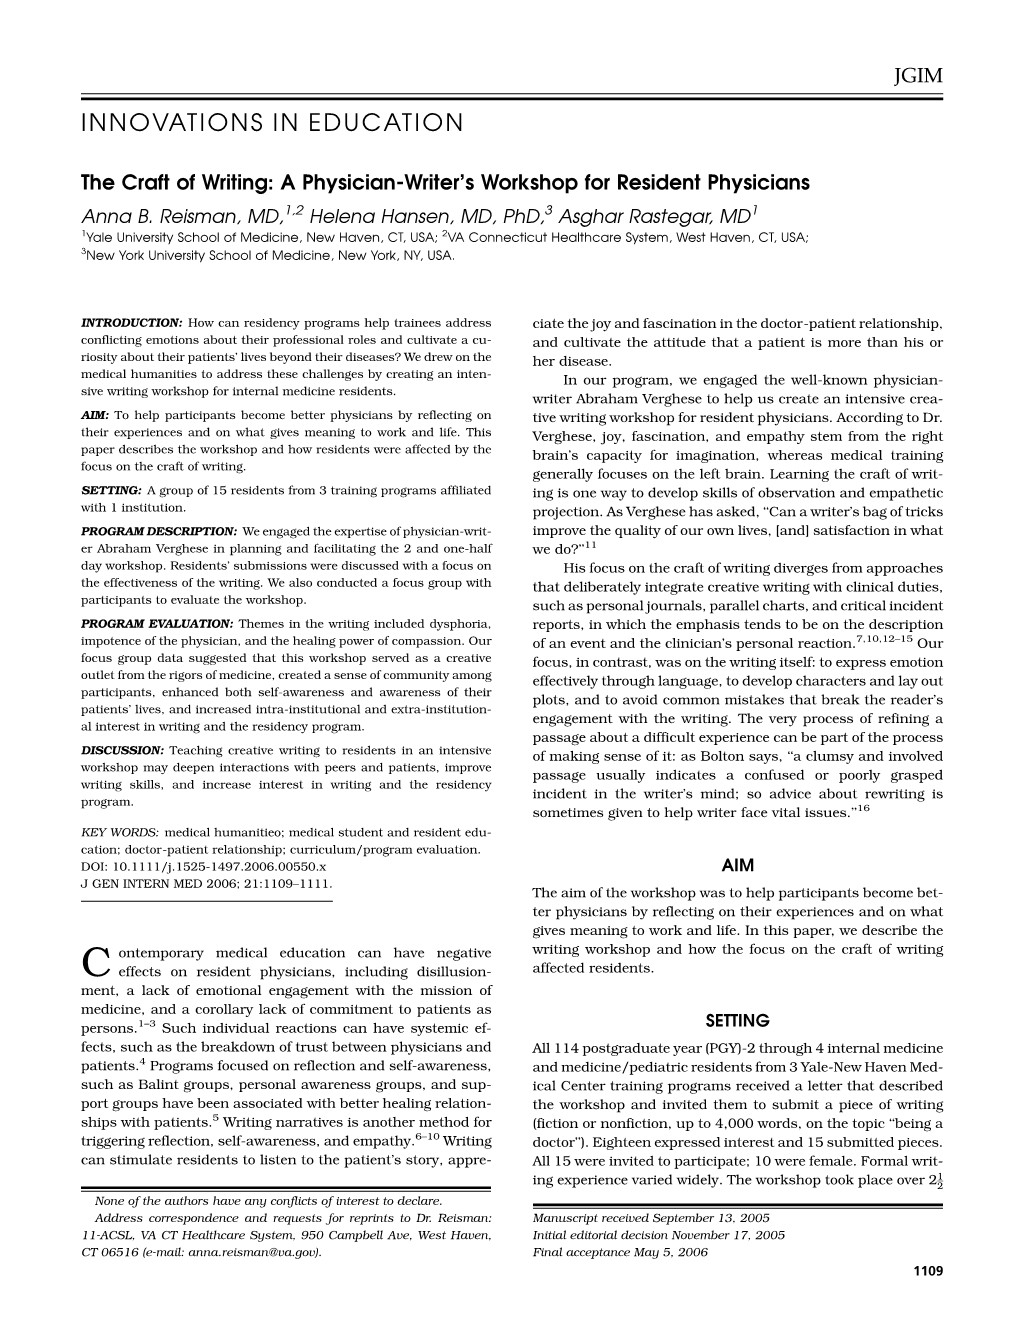 A Physician-Writer's Workshop for Resident Physicians